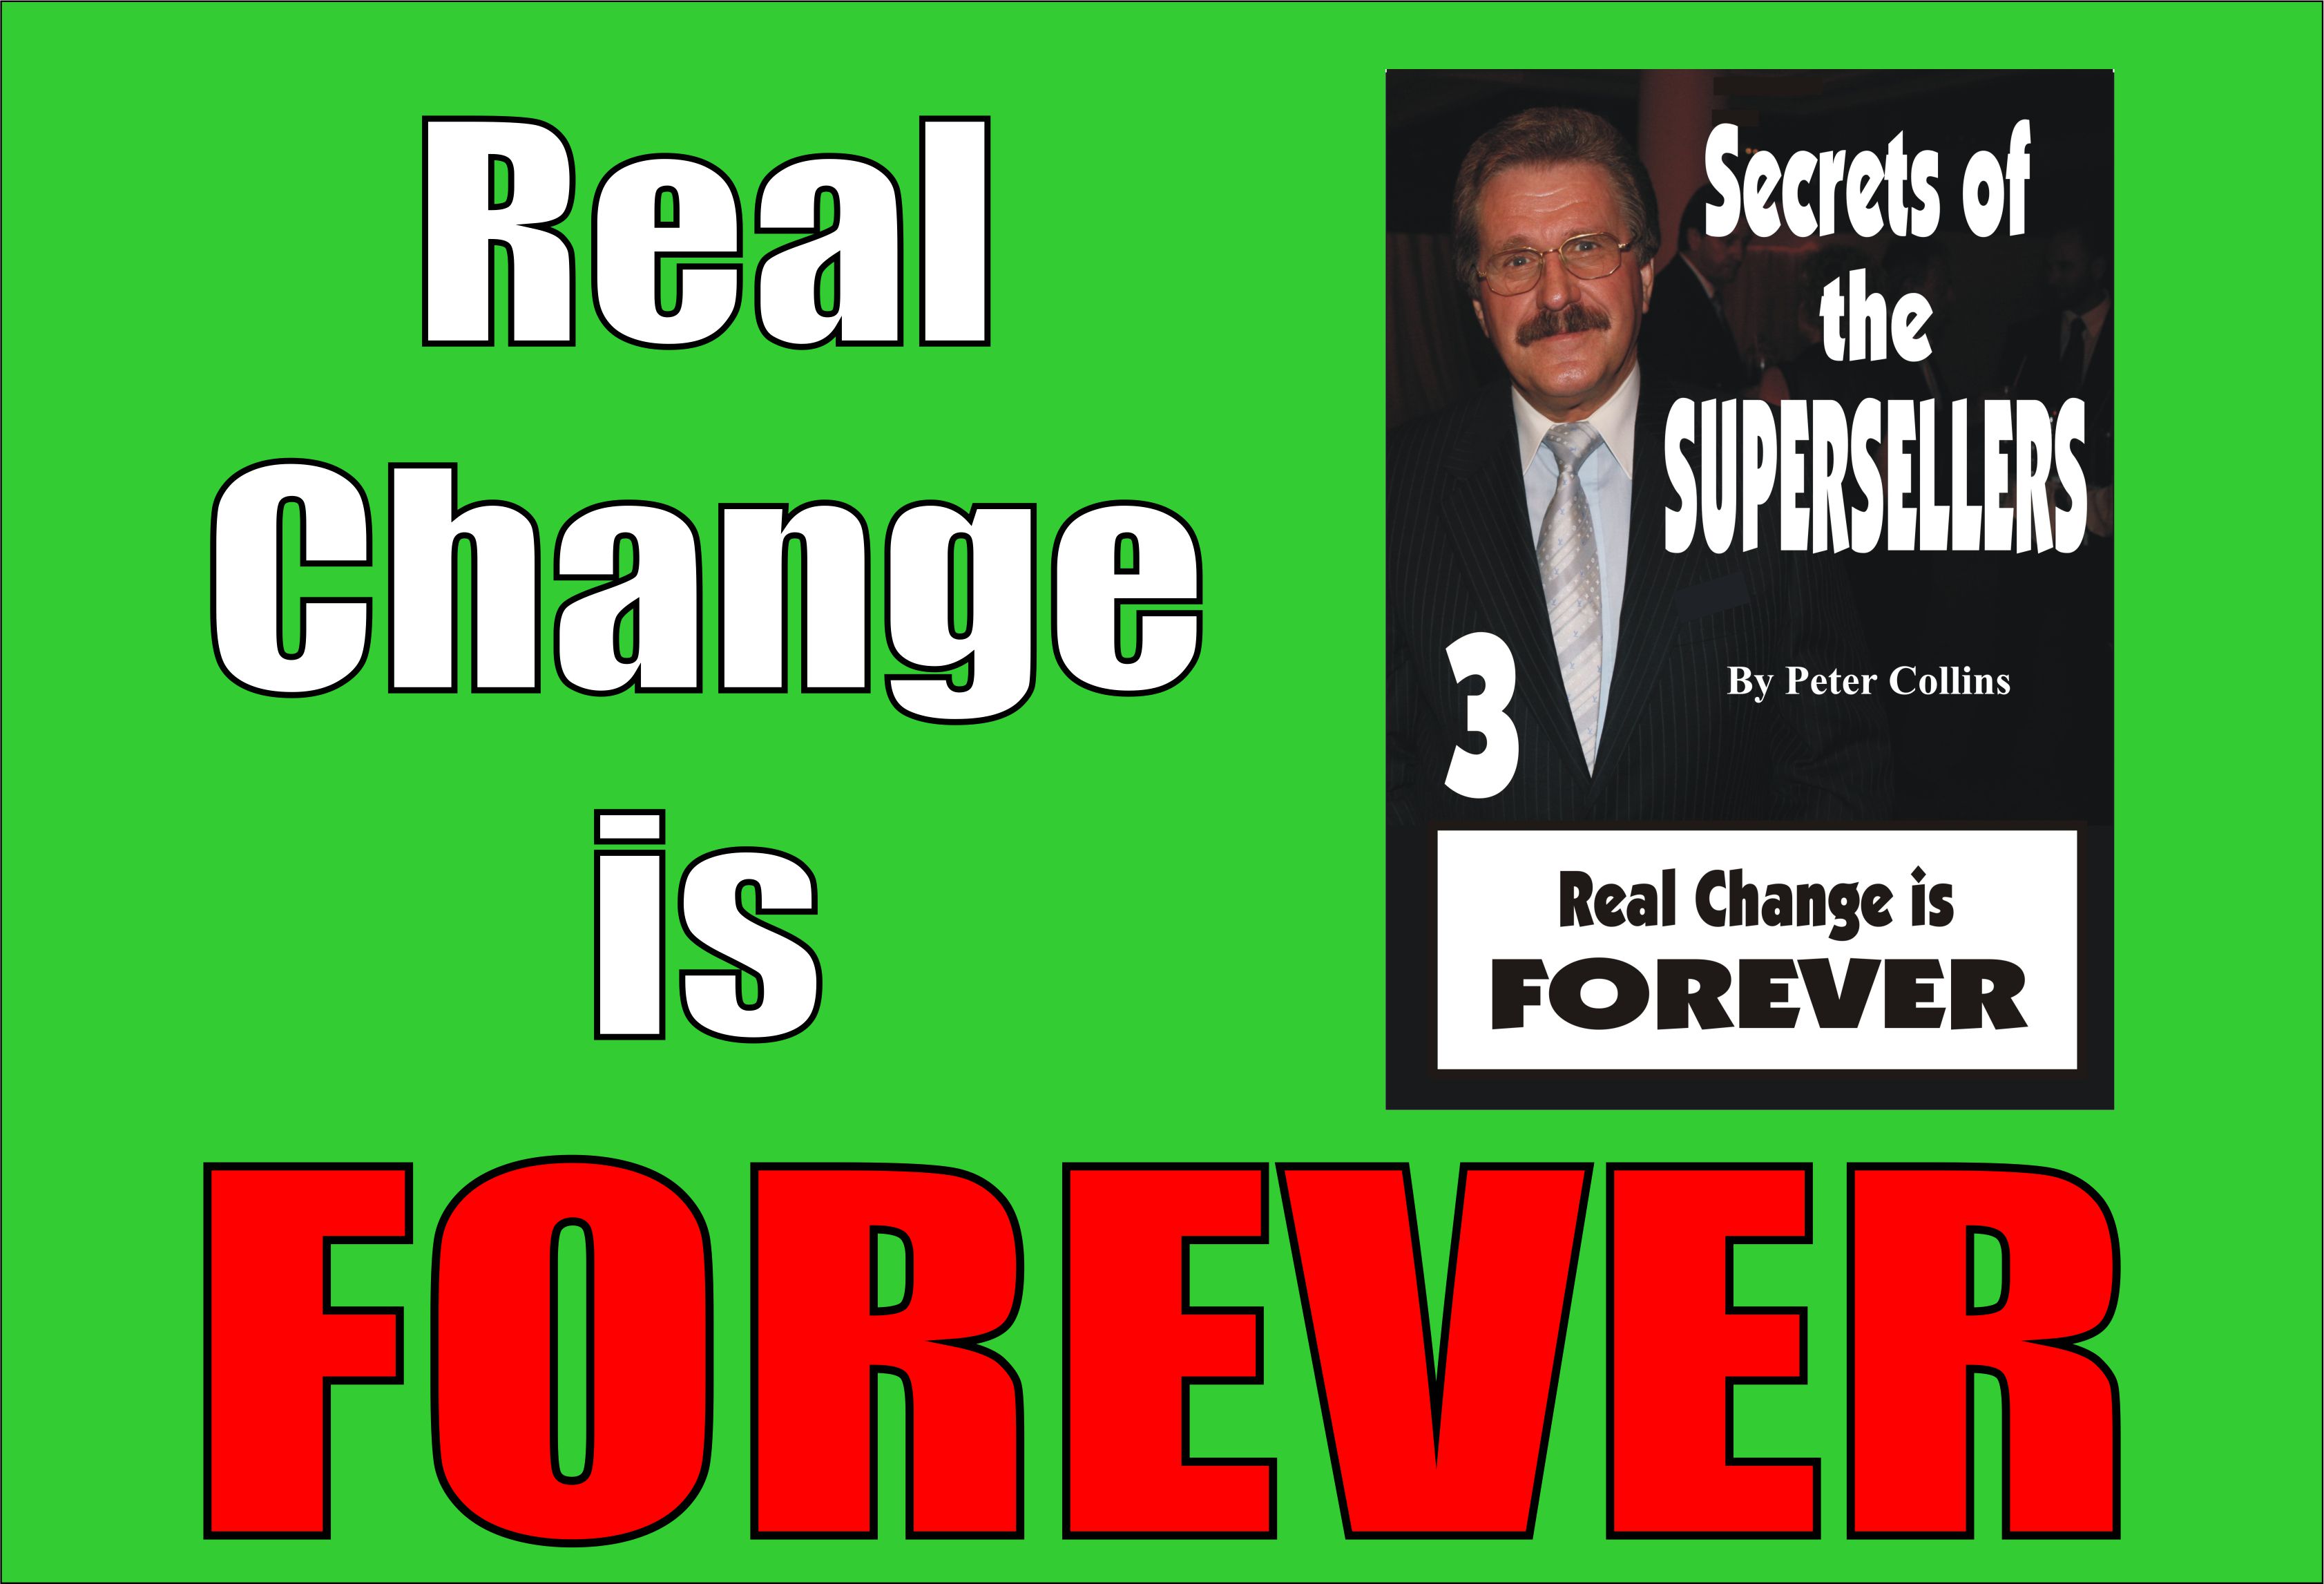 Real Change if FOREVER